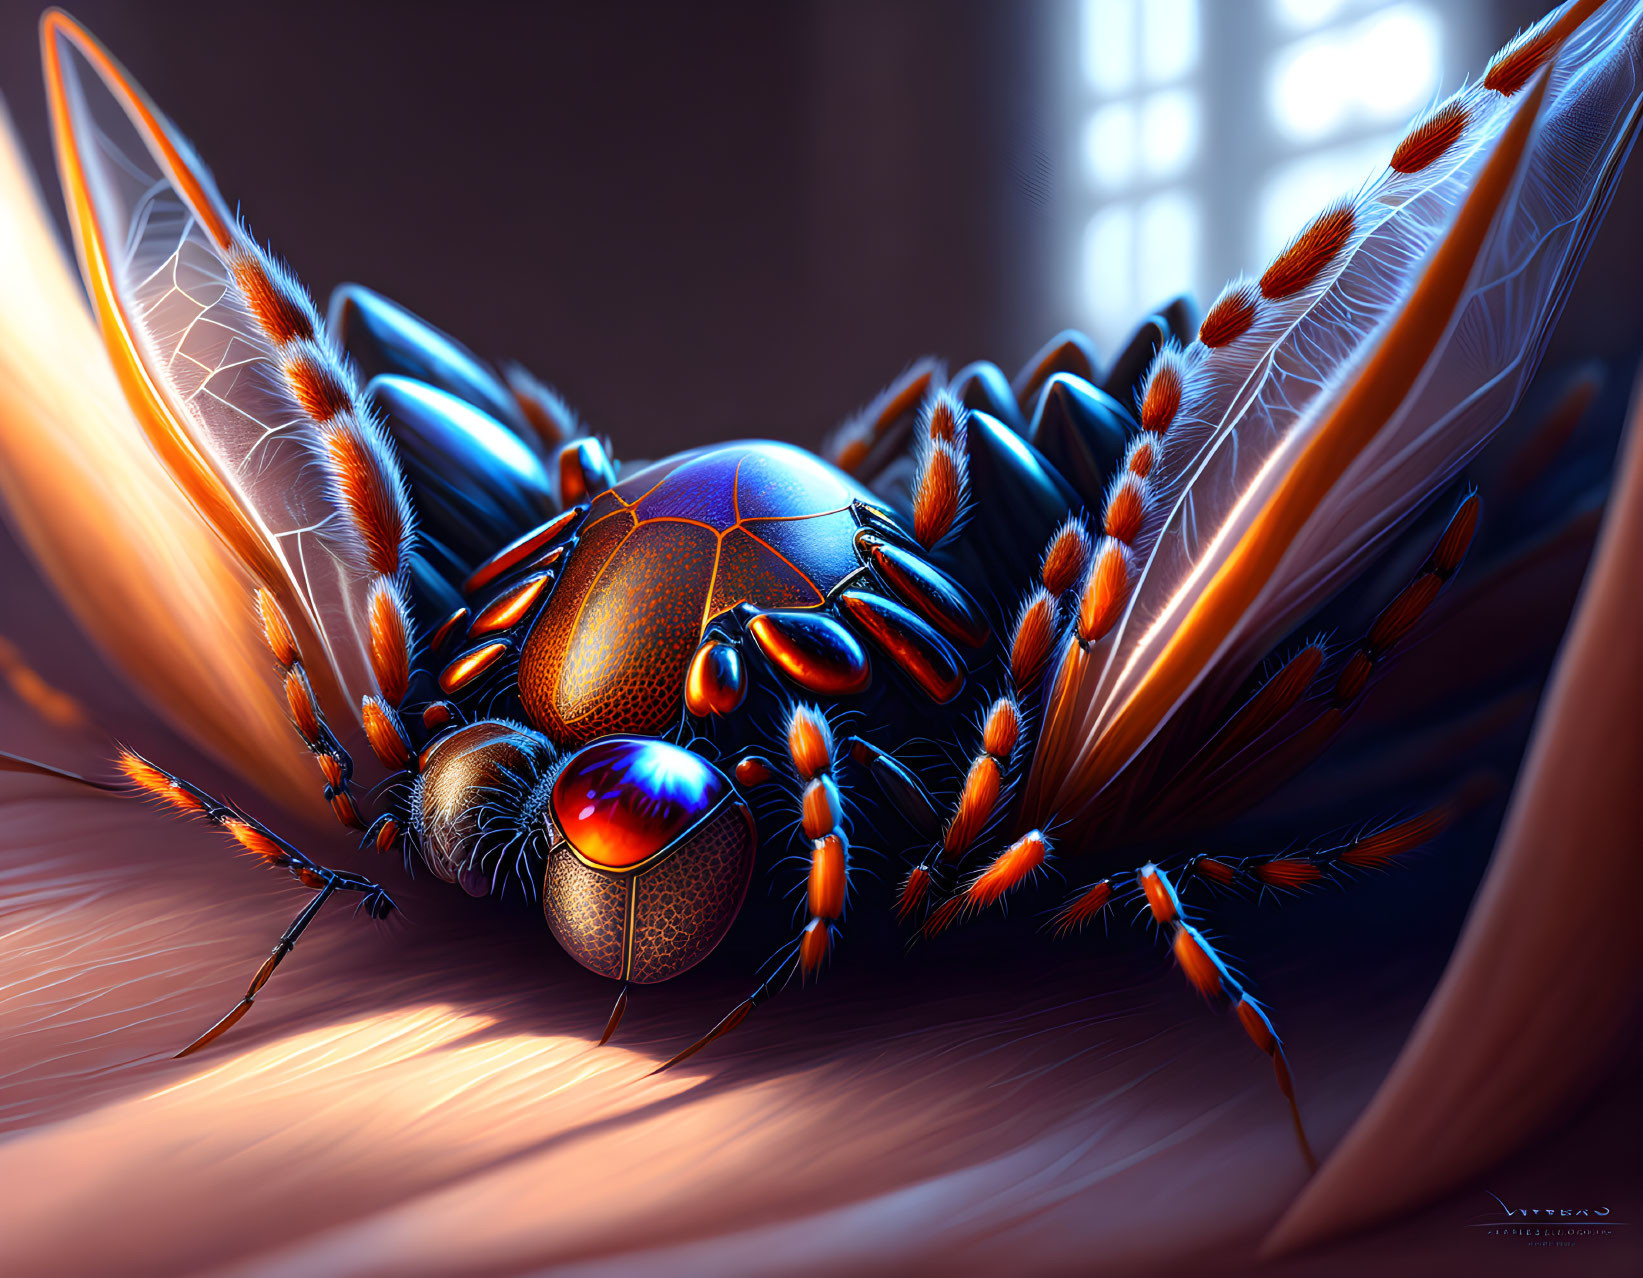 Mechanical insect digital illustration with intricate gears and delicate wings.